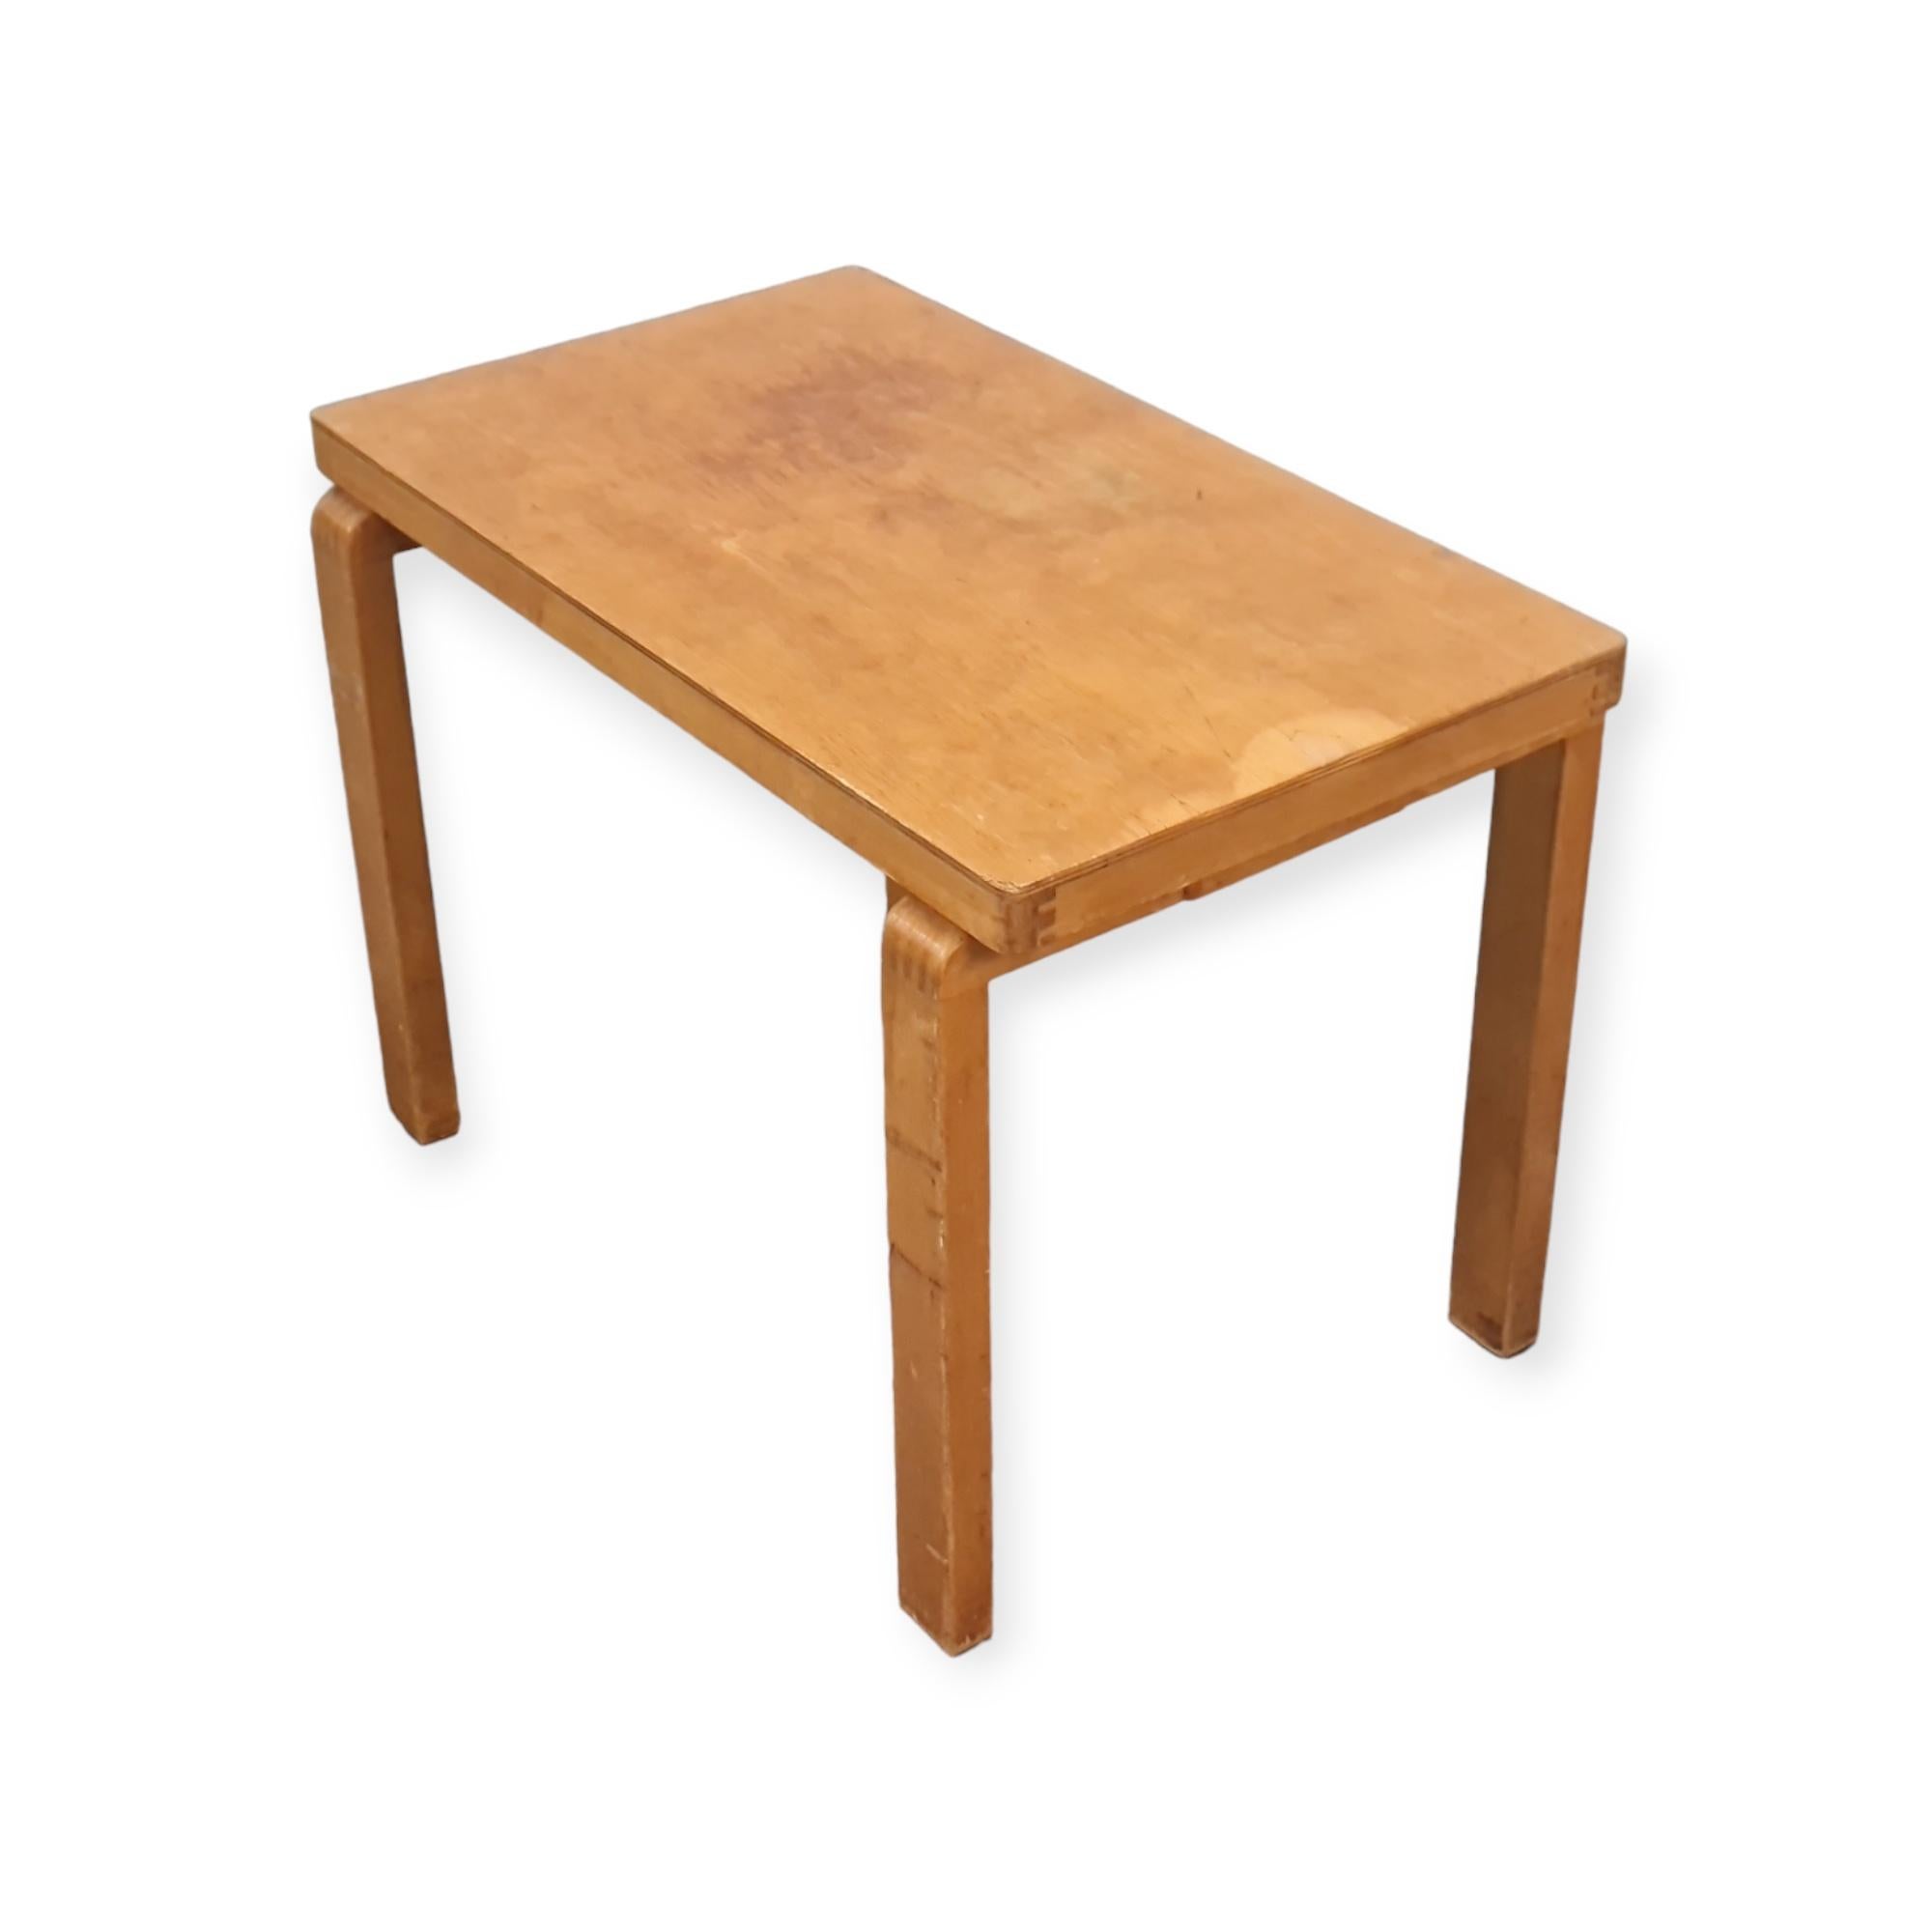 An Exceptionally Rare Alvar Aalto War-time Side table, 1940s For Sale 8